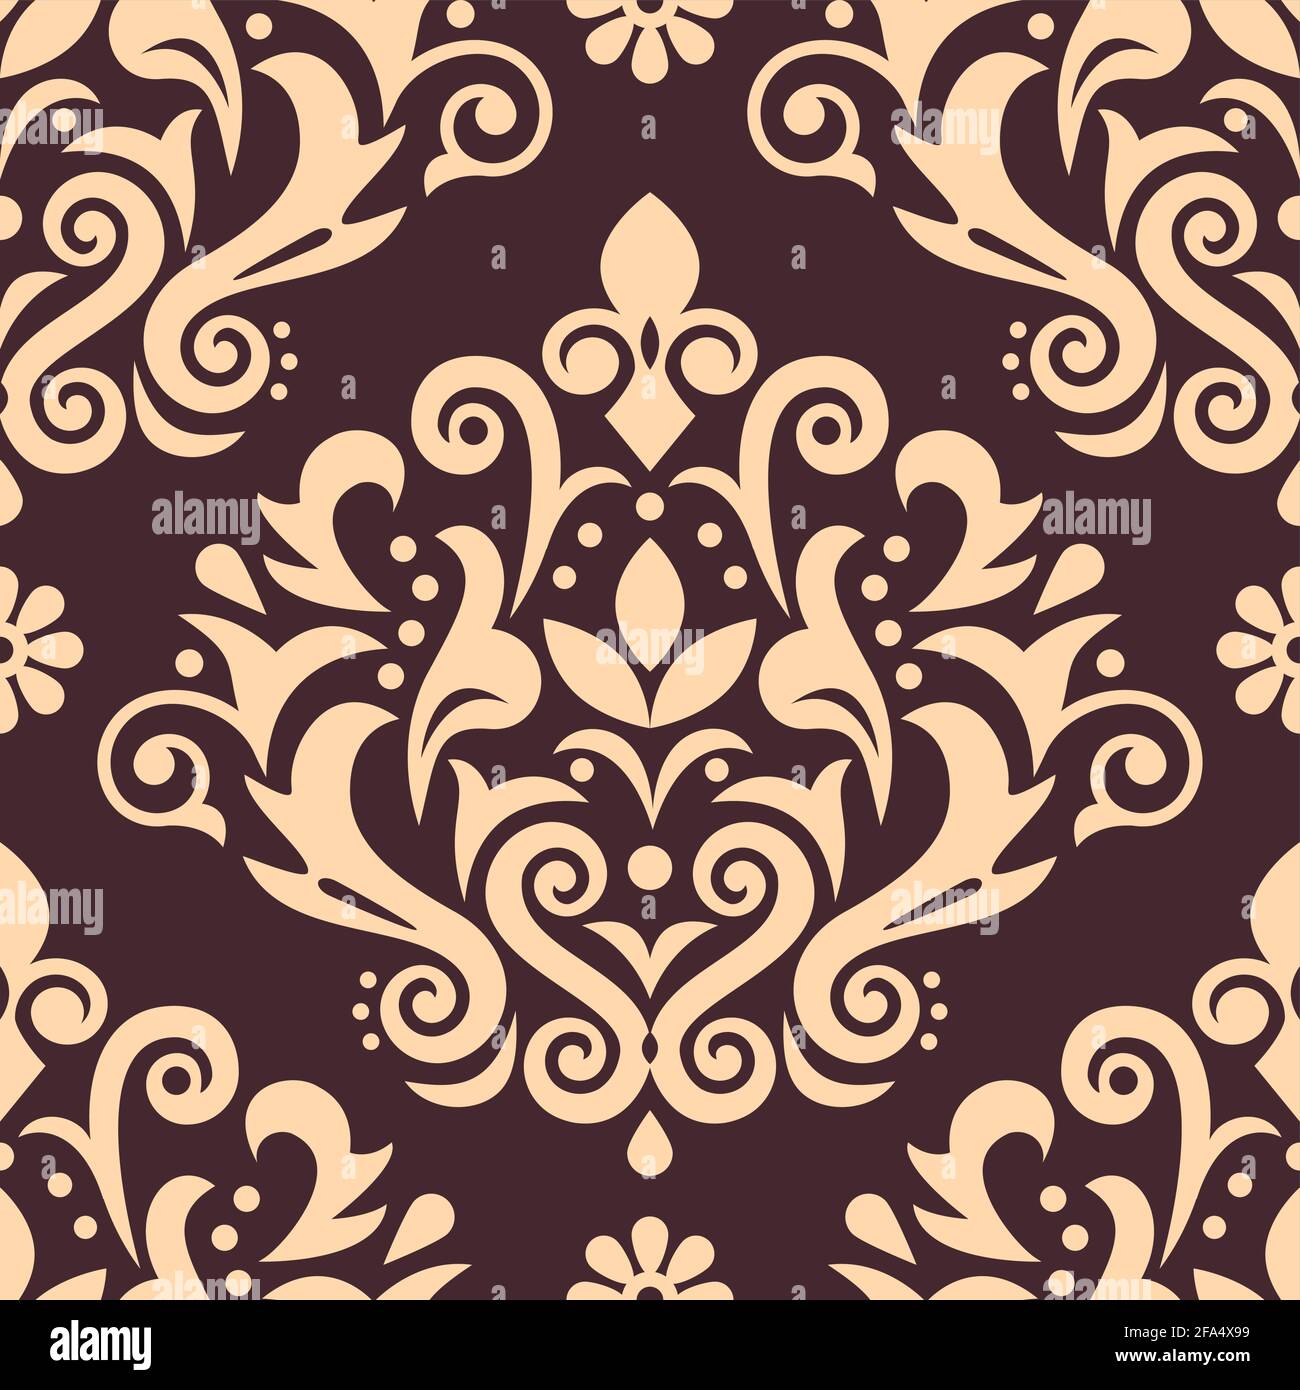 Damask luxury vector seamless pattern, victorian navy blue textile or fabric print design with flowers, swirls and leaves Stock Vector